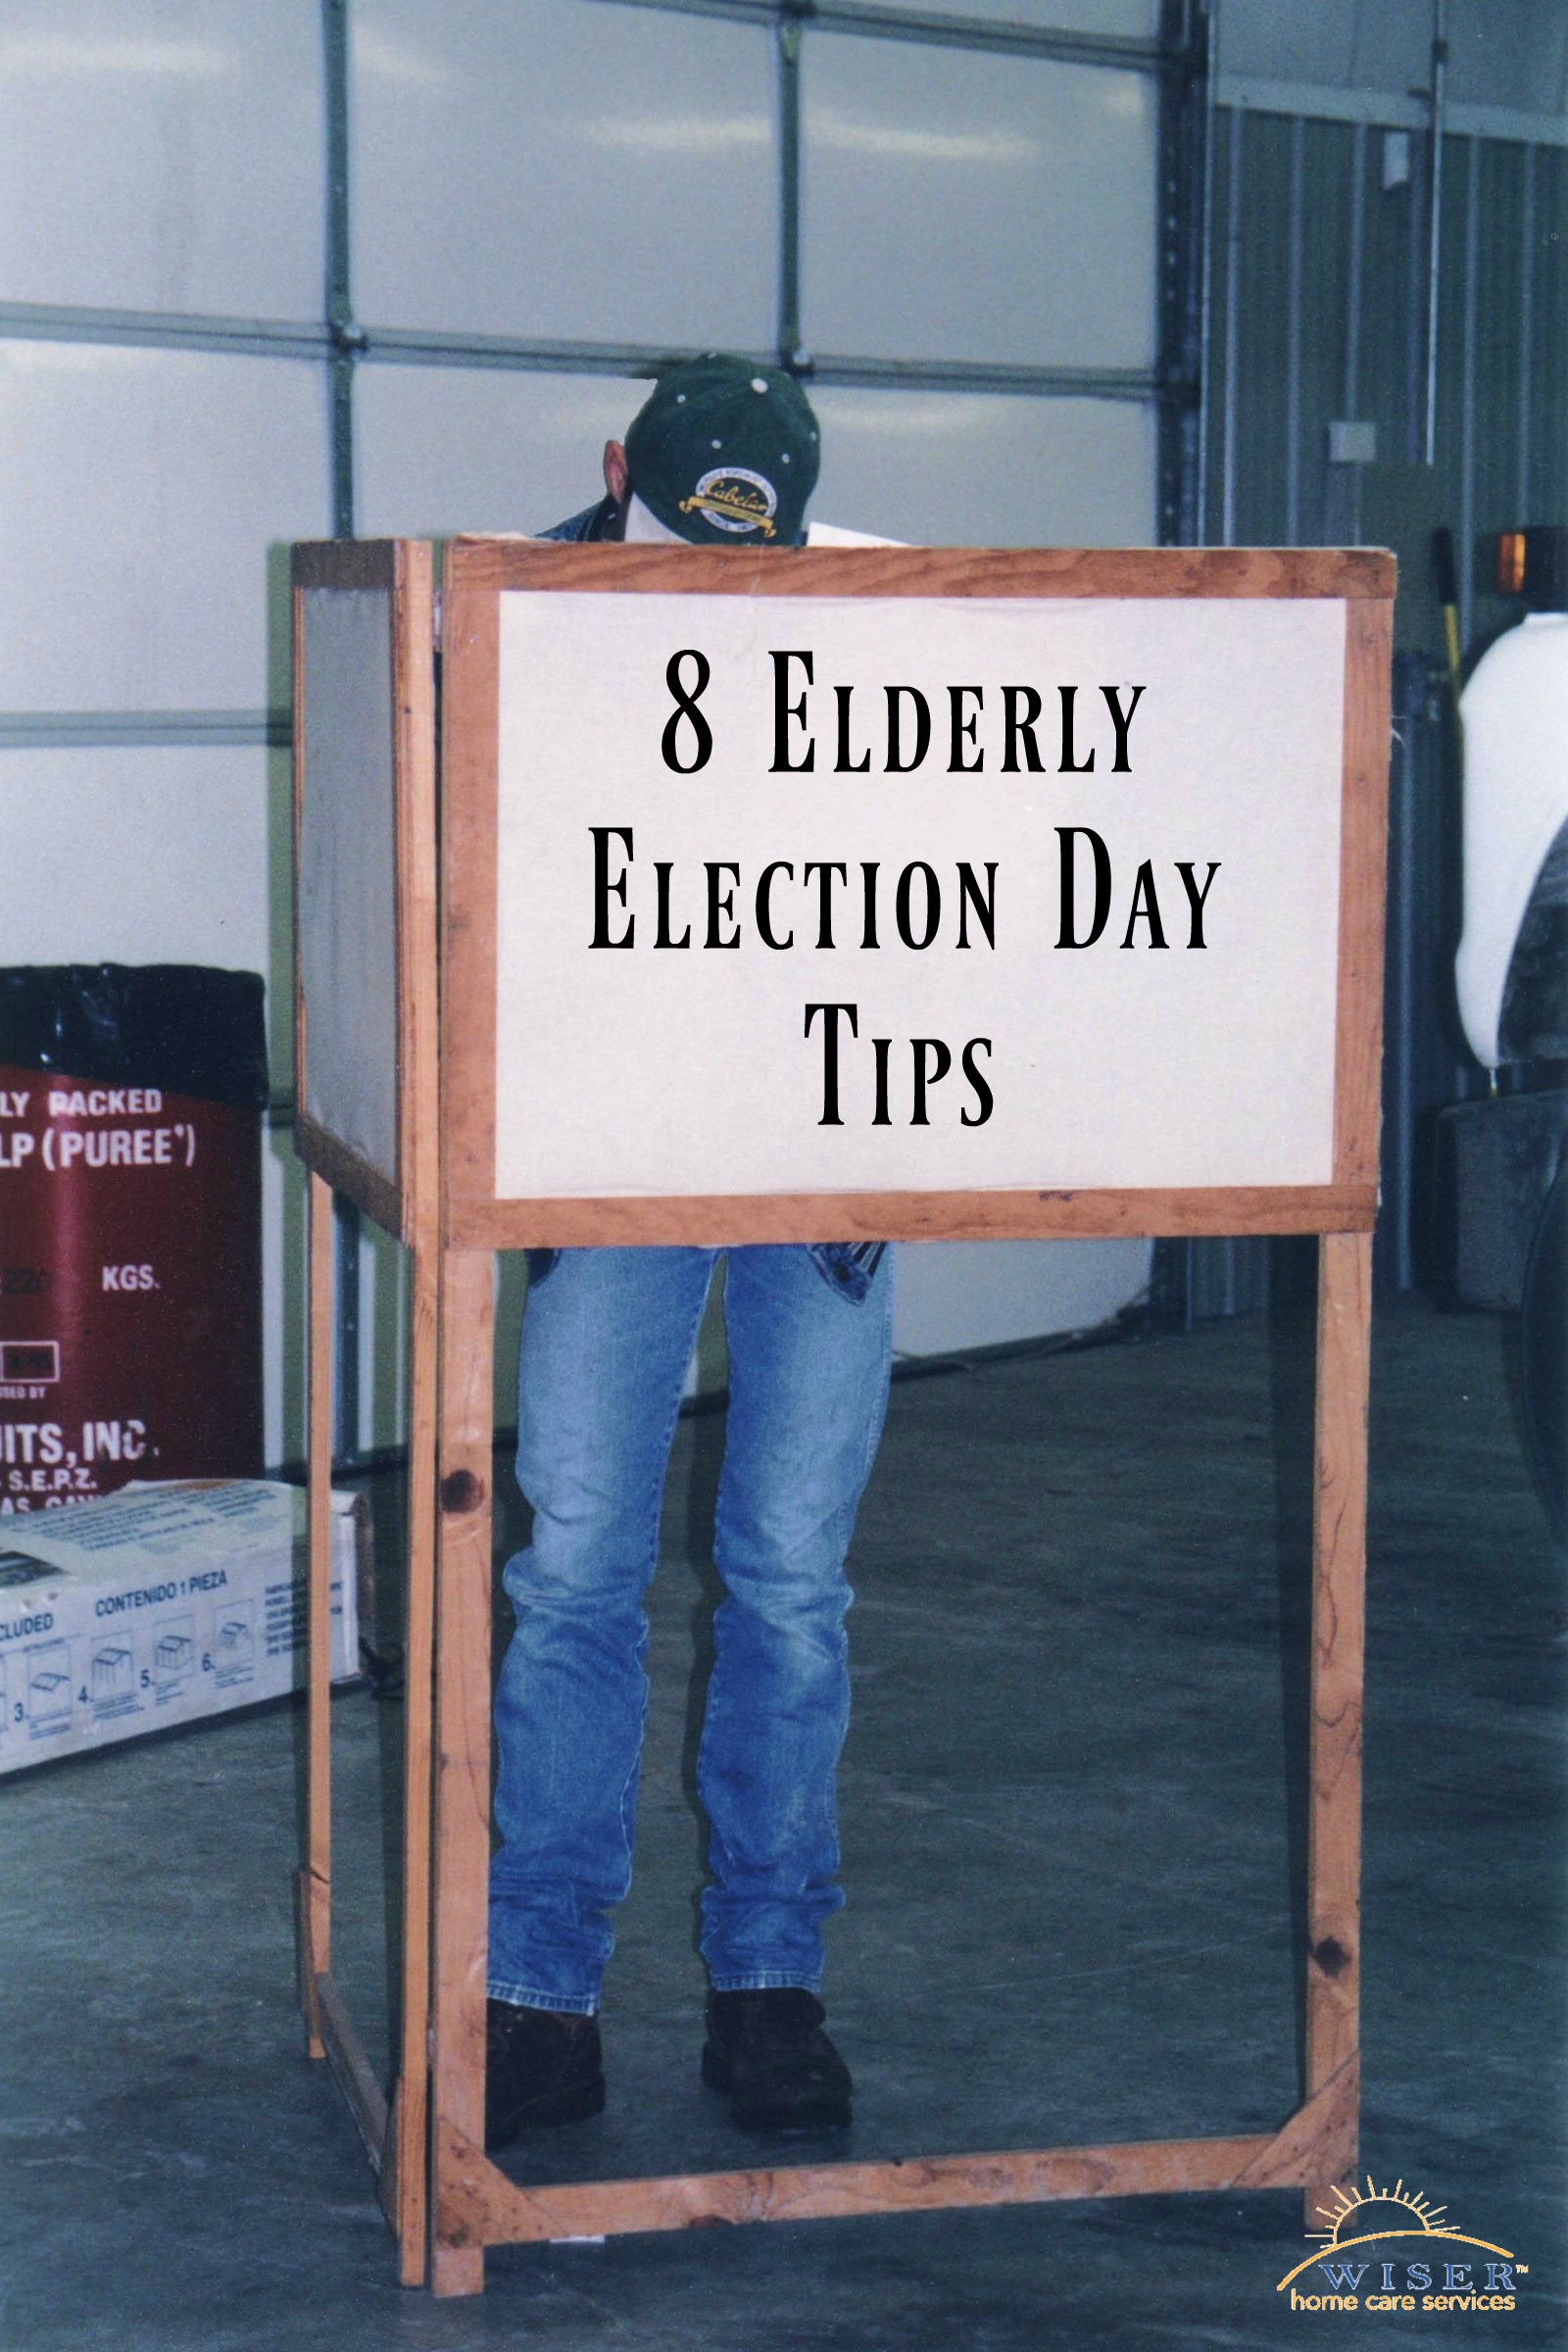 It only happens once every 4 years. That's right. Election day is almost here. Help your elderly loved one vote smoothly with these election day tips.